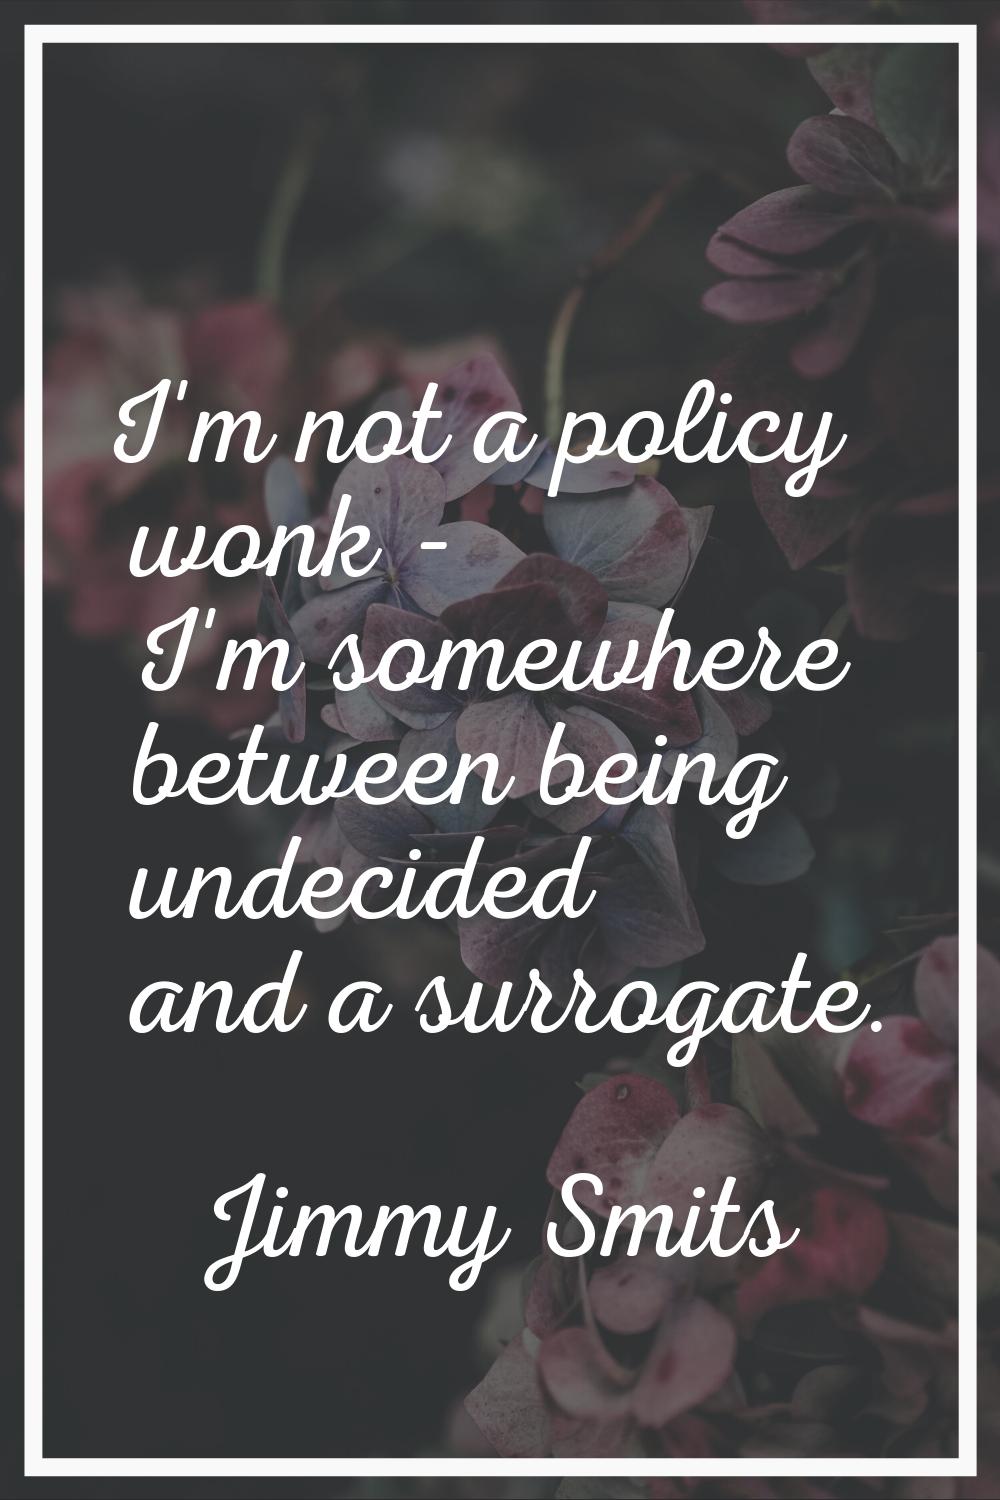 I'm not a policy wonk - I'm somewhere between being undecided and a surrogate.